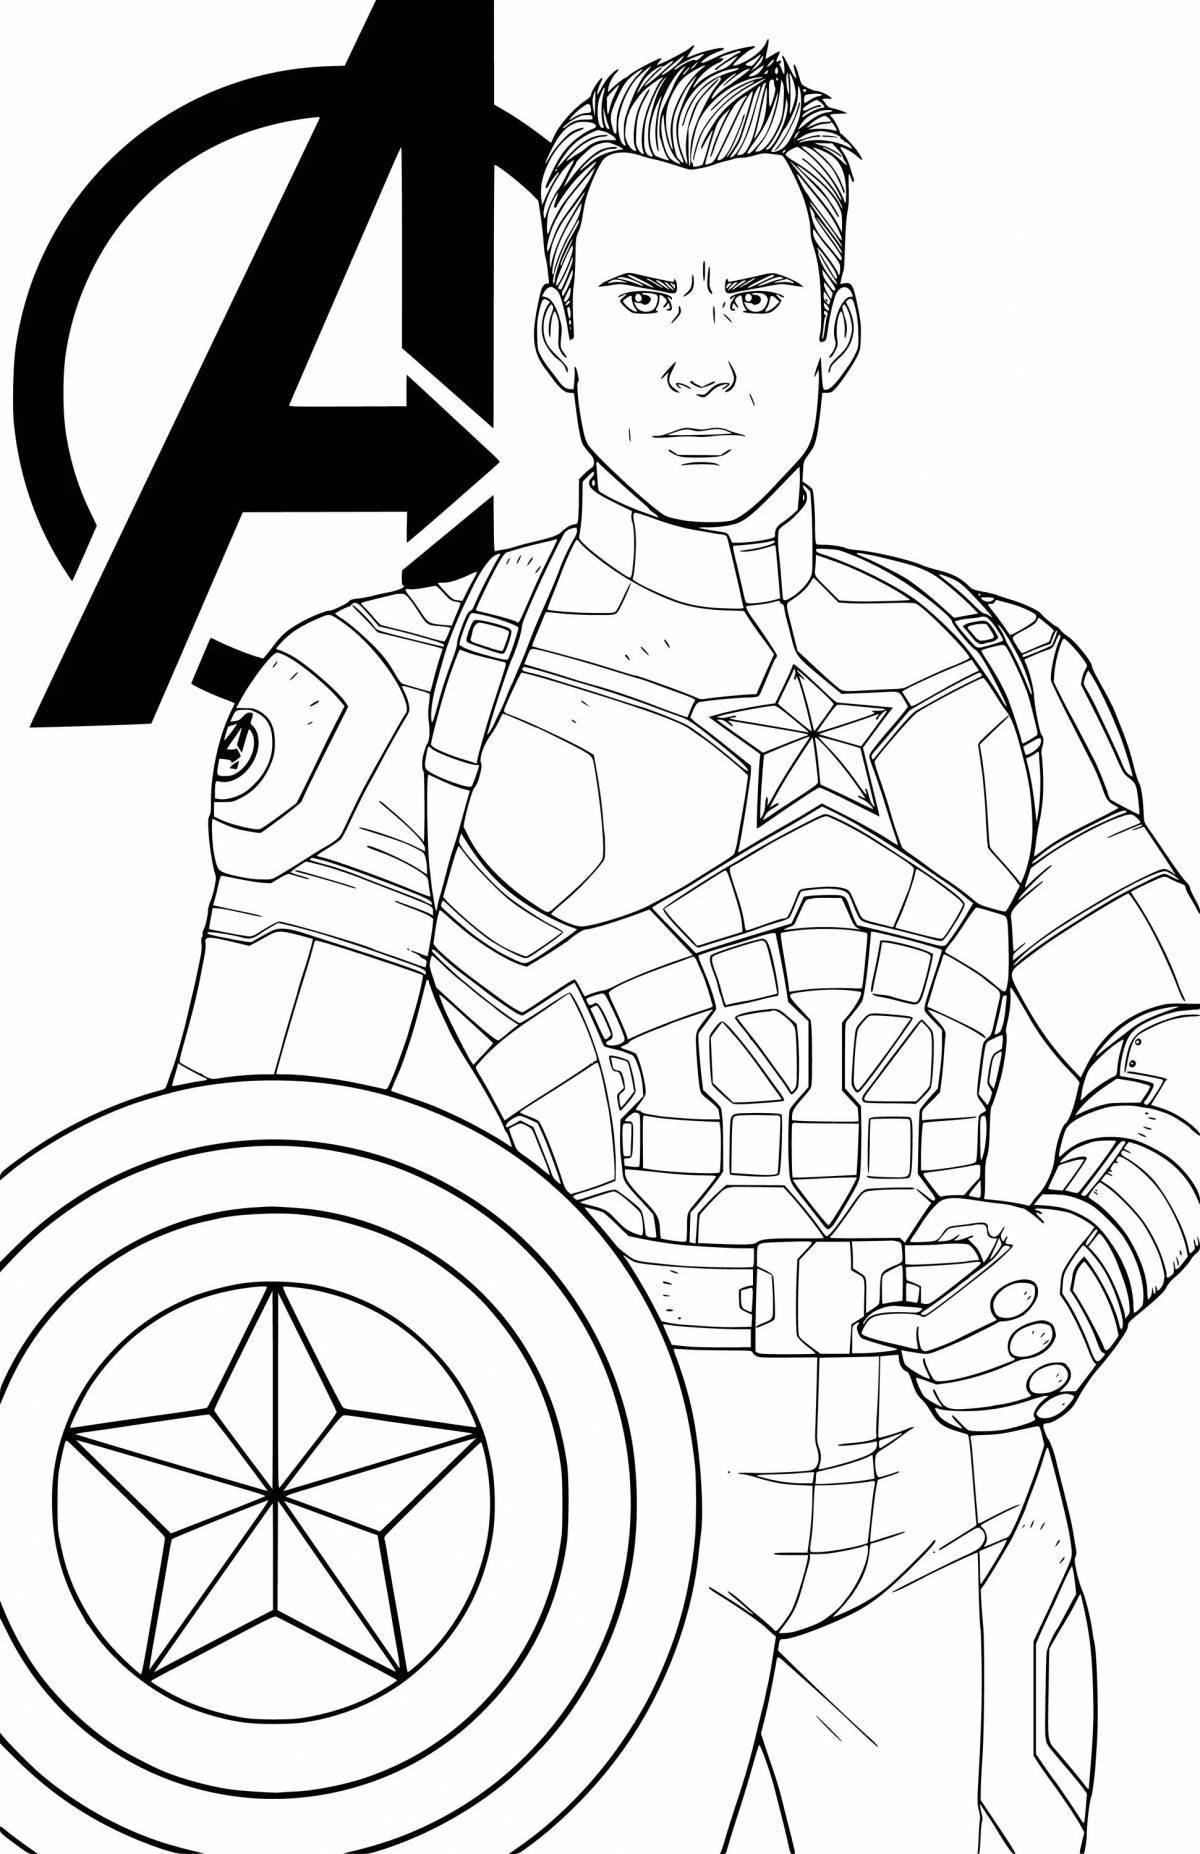 Captain Marvel's amazing coloring book